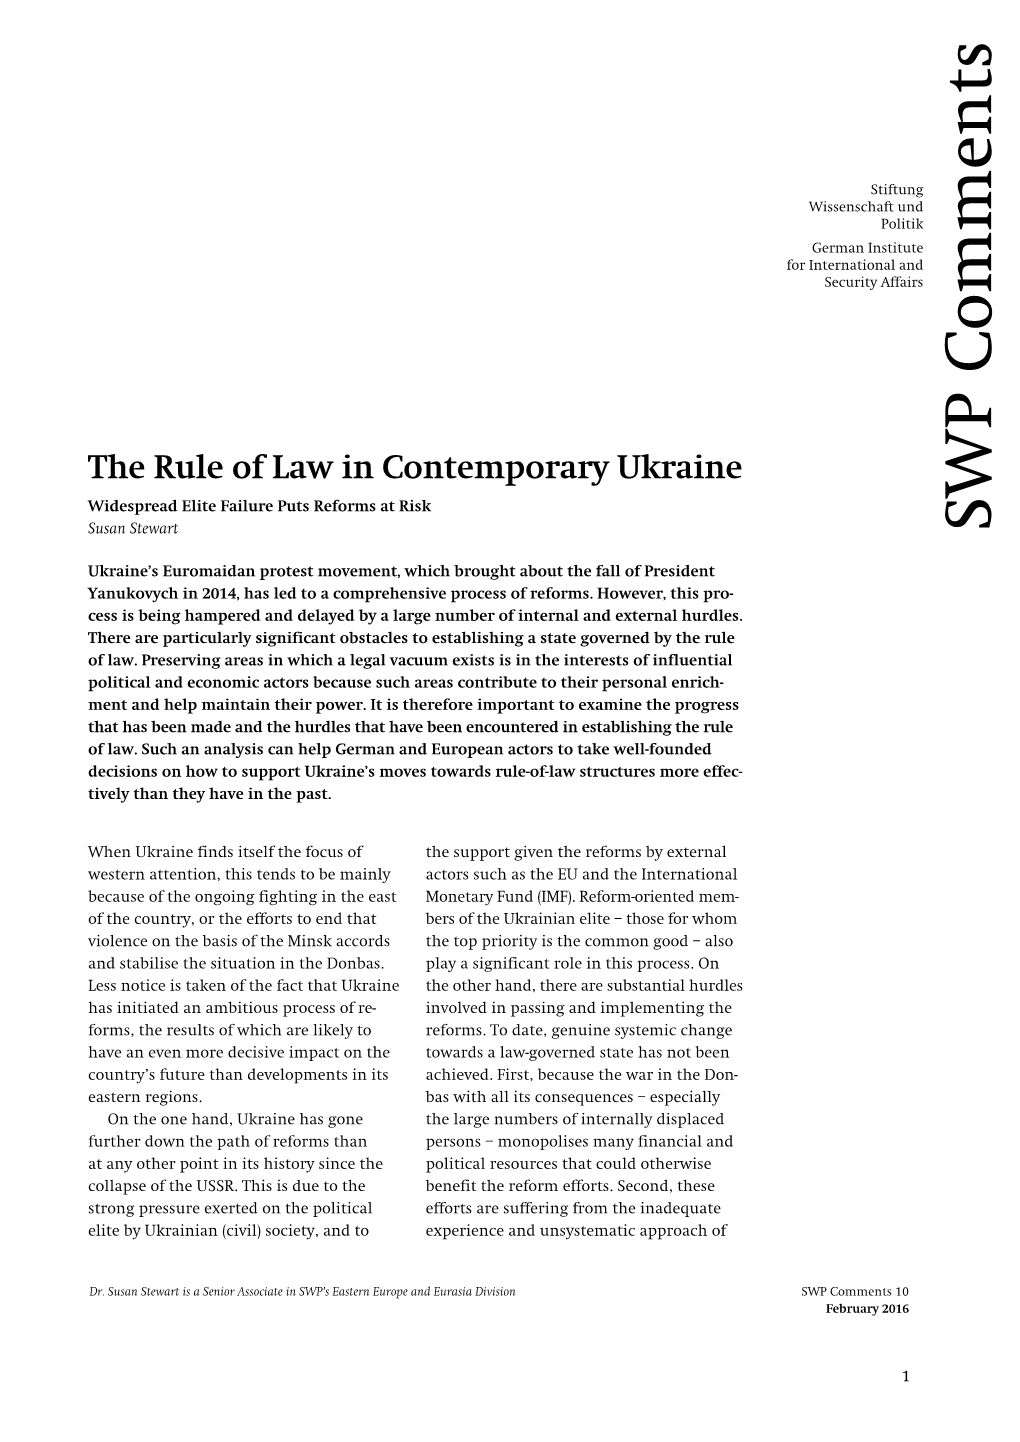 The Rule of Law in Contemporary Ukraine: Widespread Elite Failure Puts Reforms at Risk